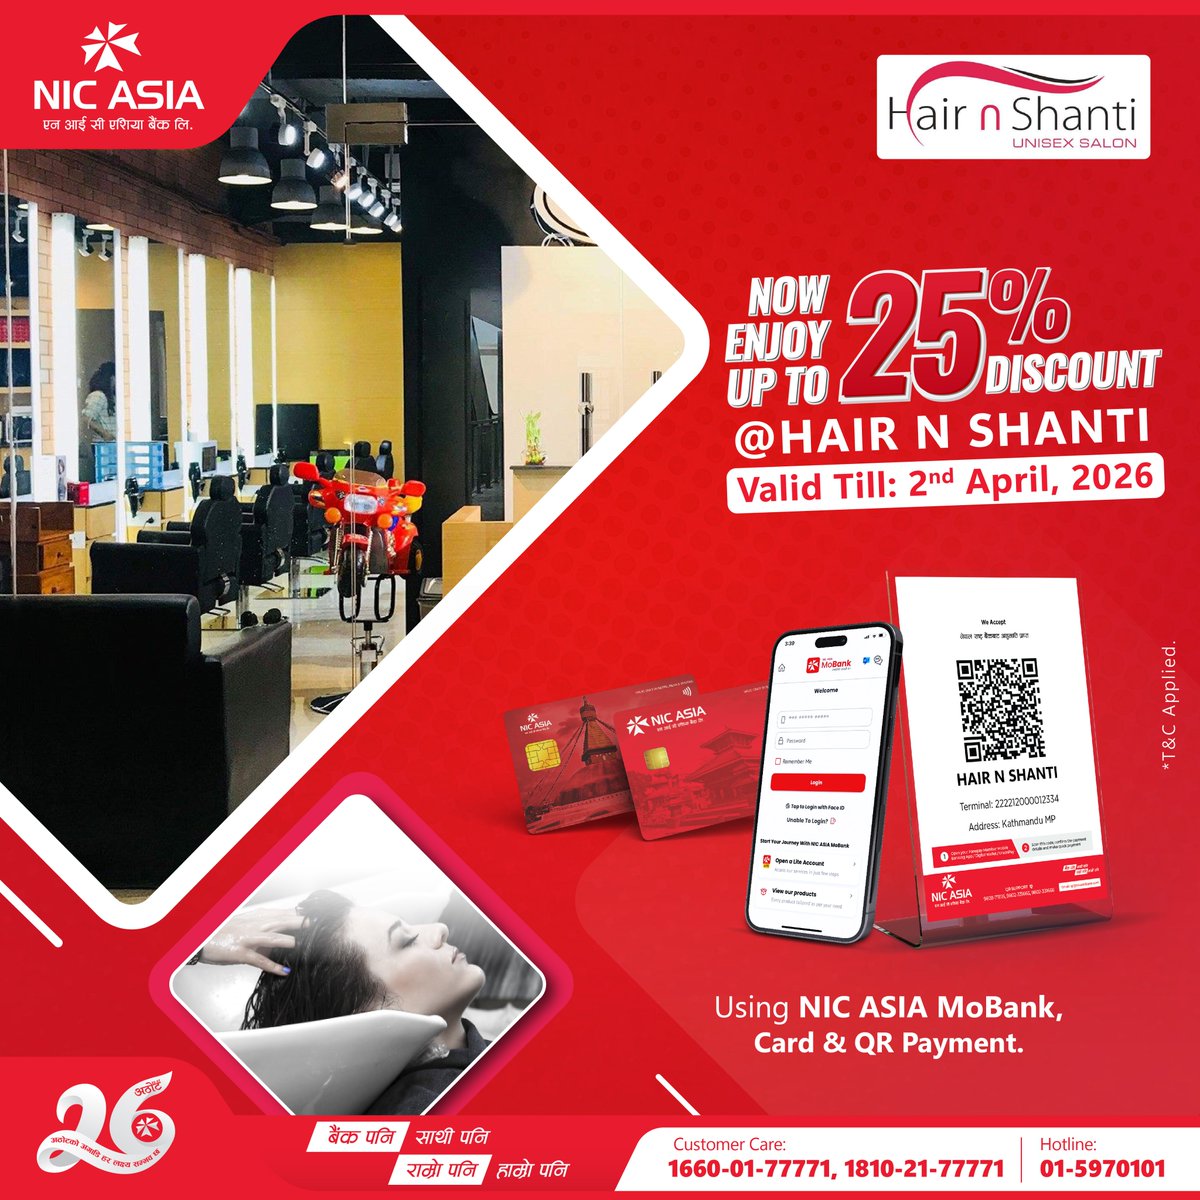 Find your style, find yourself at Hair n Shanti at Eyeplex Mall and enjoy upto 25% discount while making payment through NIC ASIA MoBank, Debit/Credit Cards And QR Payments. Offer Valid till 2nd April 2026.

👉Apply Card: bit.ly/43ooY1q

#NICASIABank #DigitalFirst